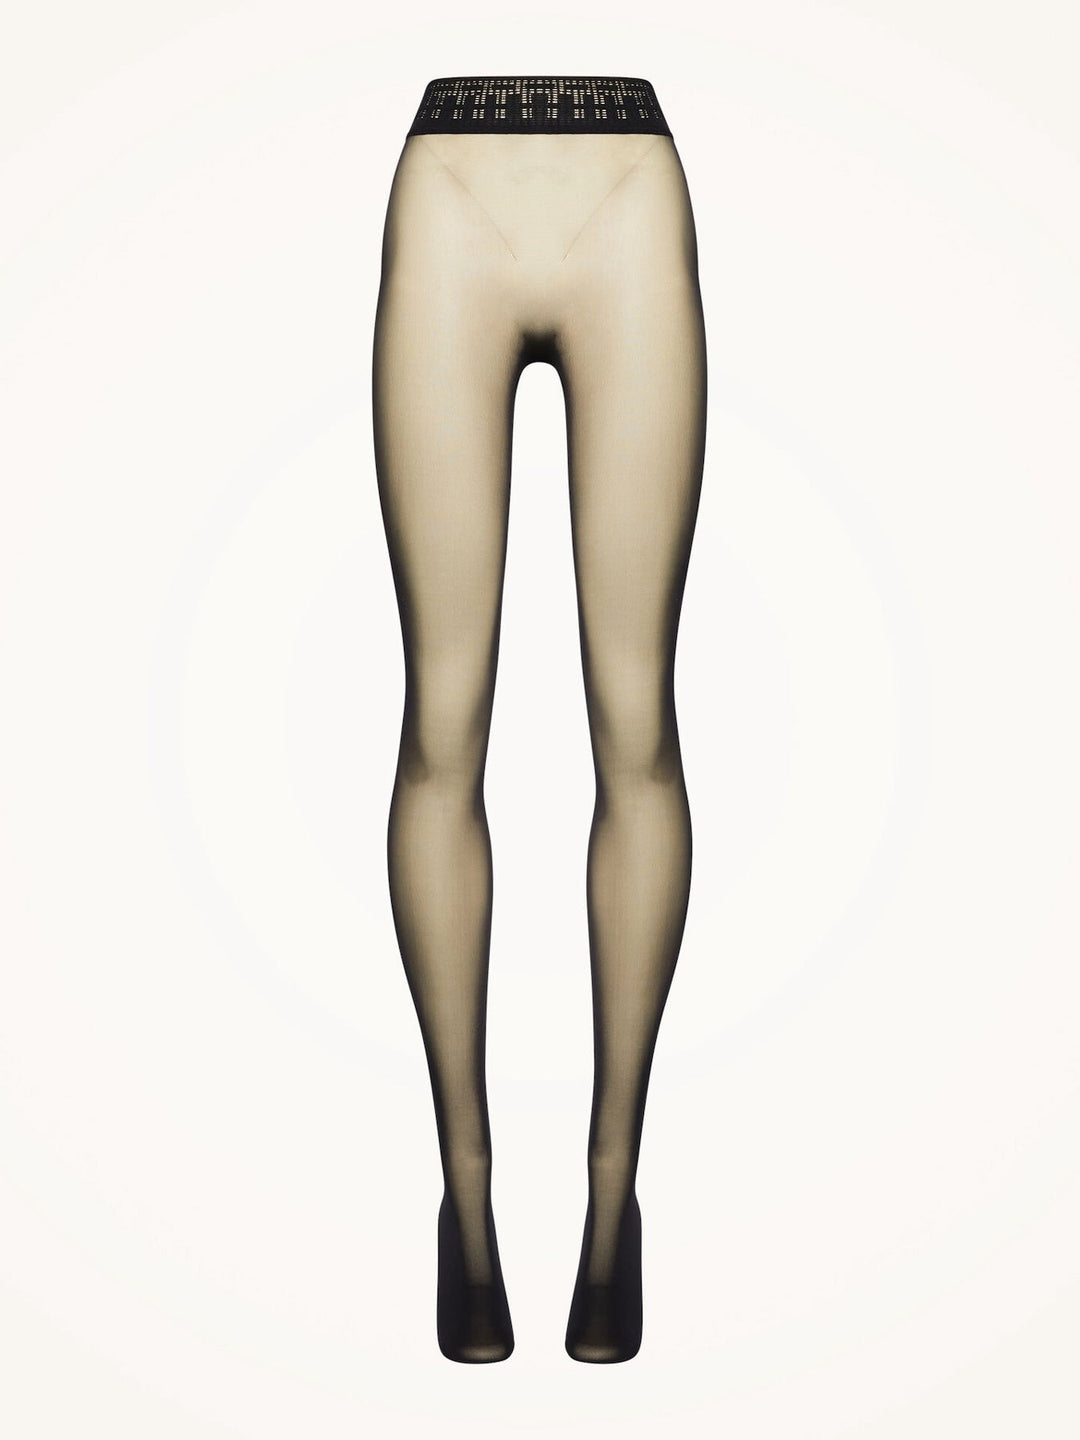 Wolford Fatal 15 Seamless Tights - Sugar Cookies Lingerie